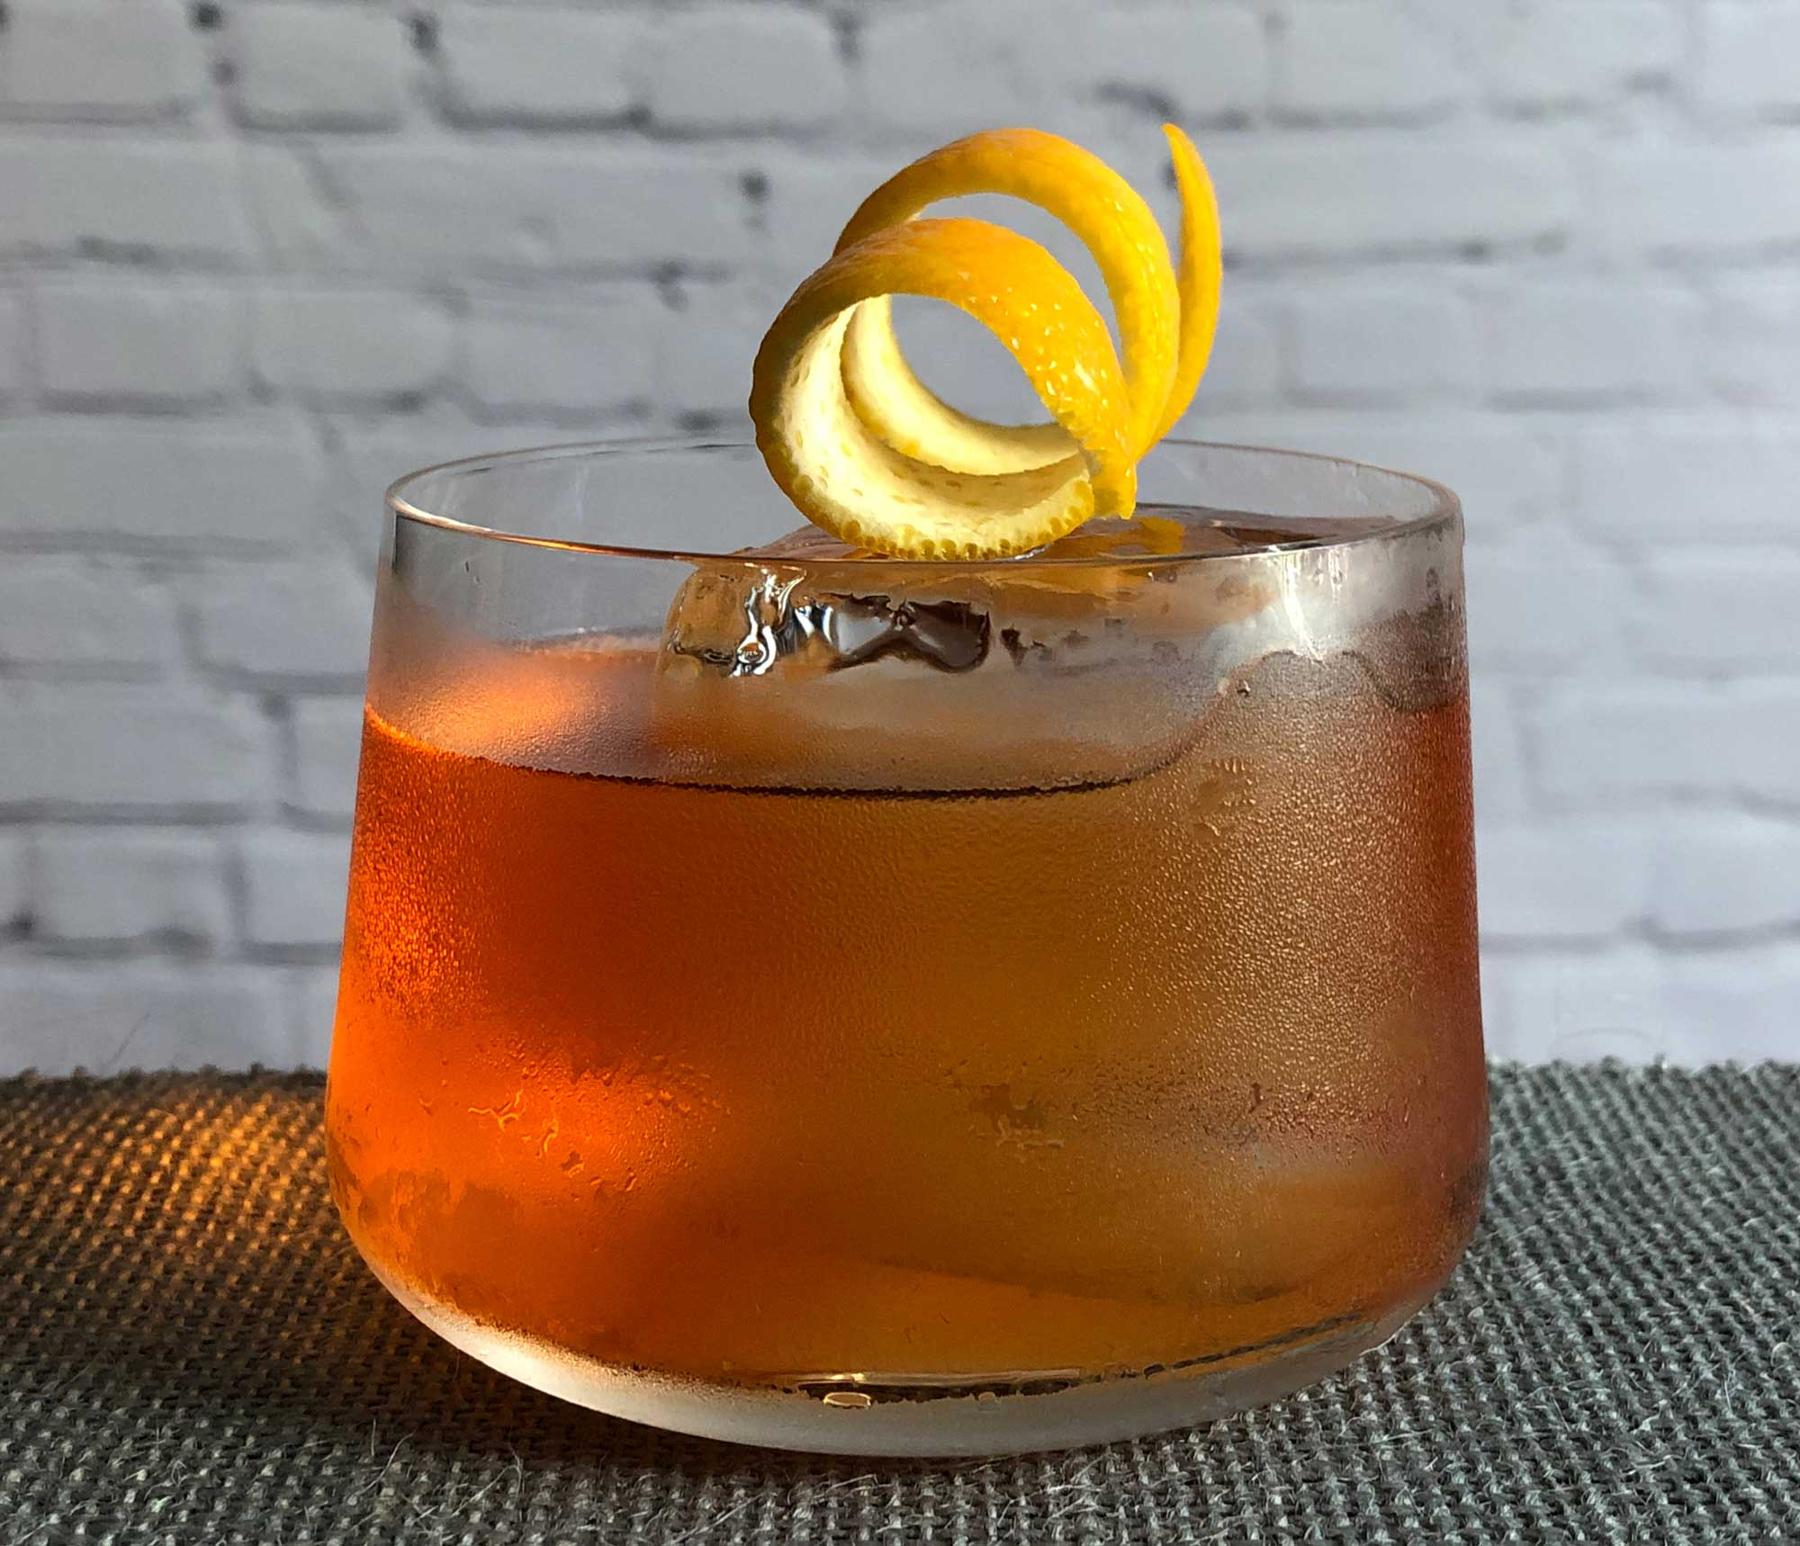 An example of the Old Pal, the mixed drink (drink) featuring bourbon whiskey, Aperitivo Cappelletti, Cocchi Vermouth di Torino Extra Dry, and orange twist; photo by Lee Edwards